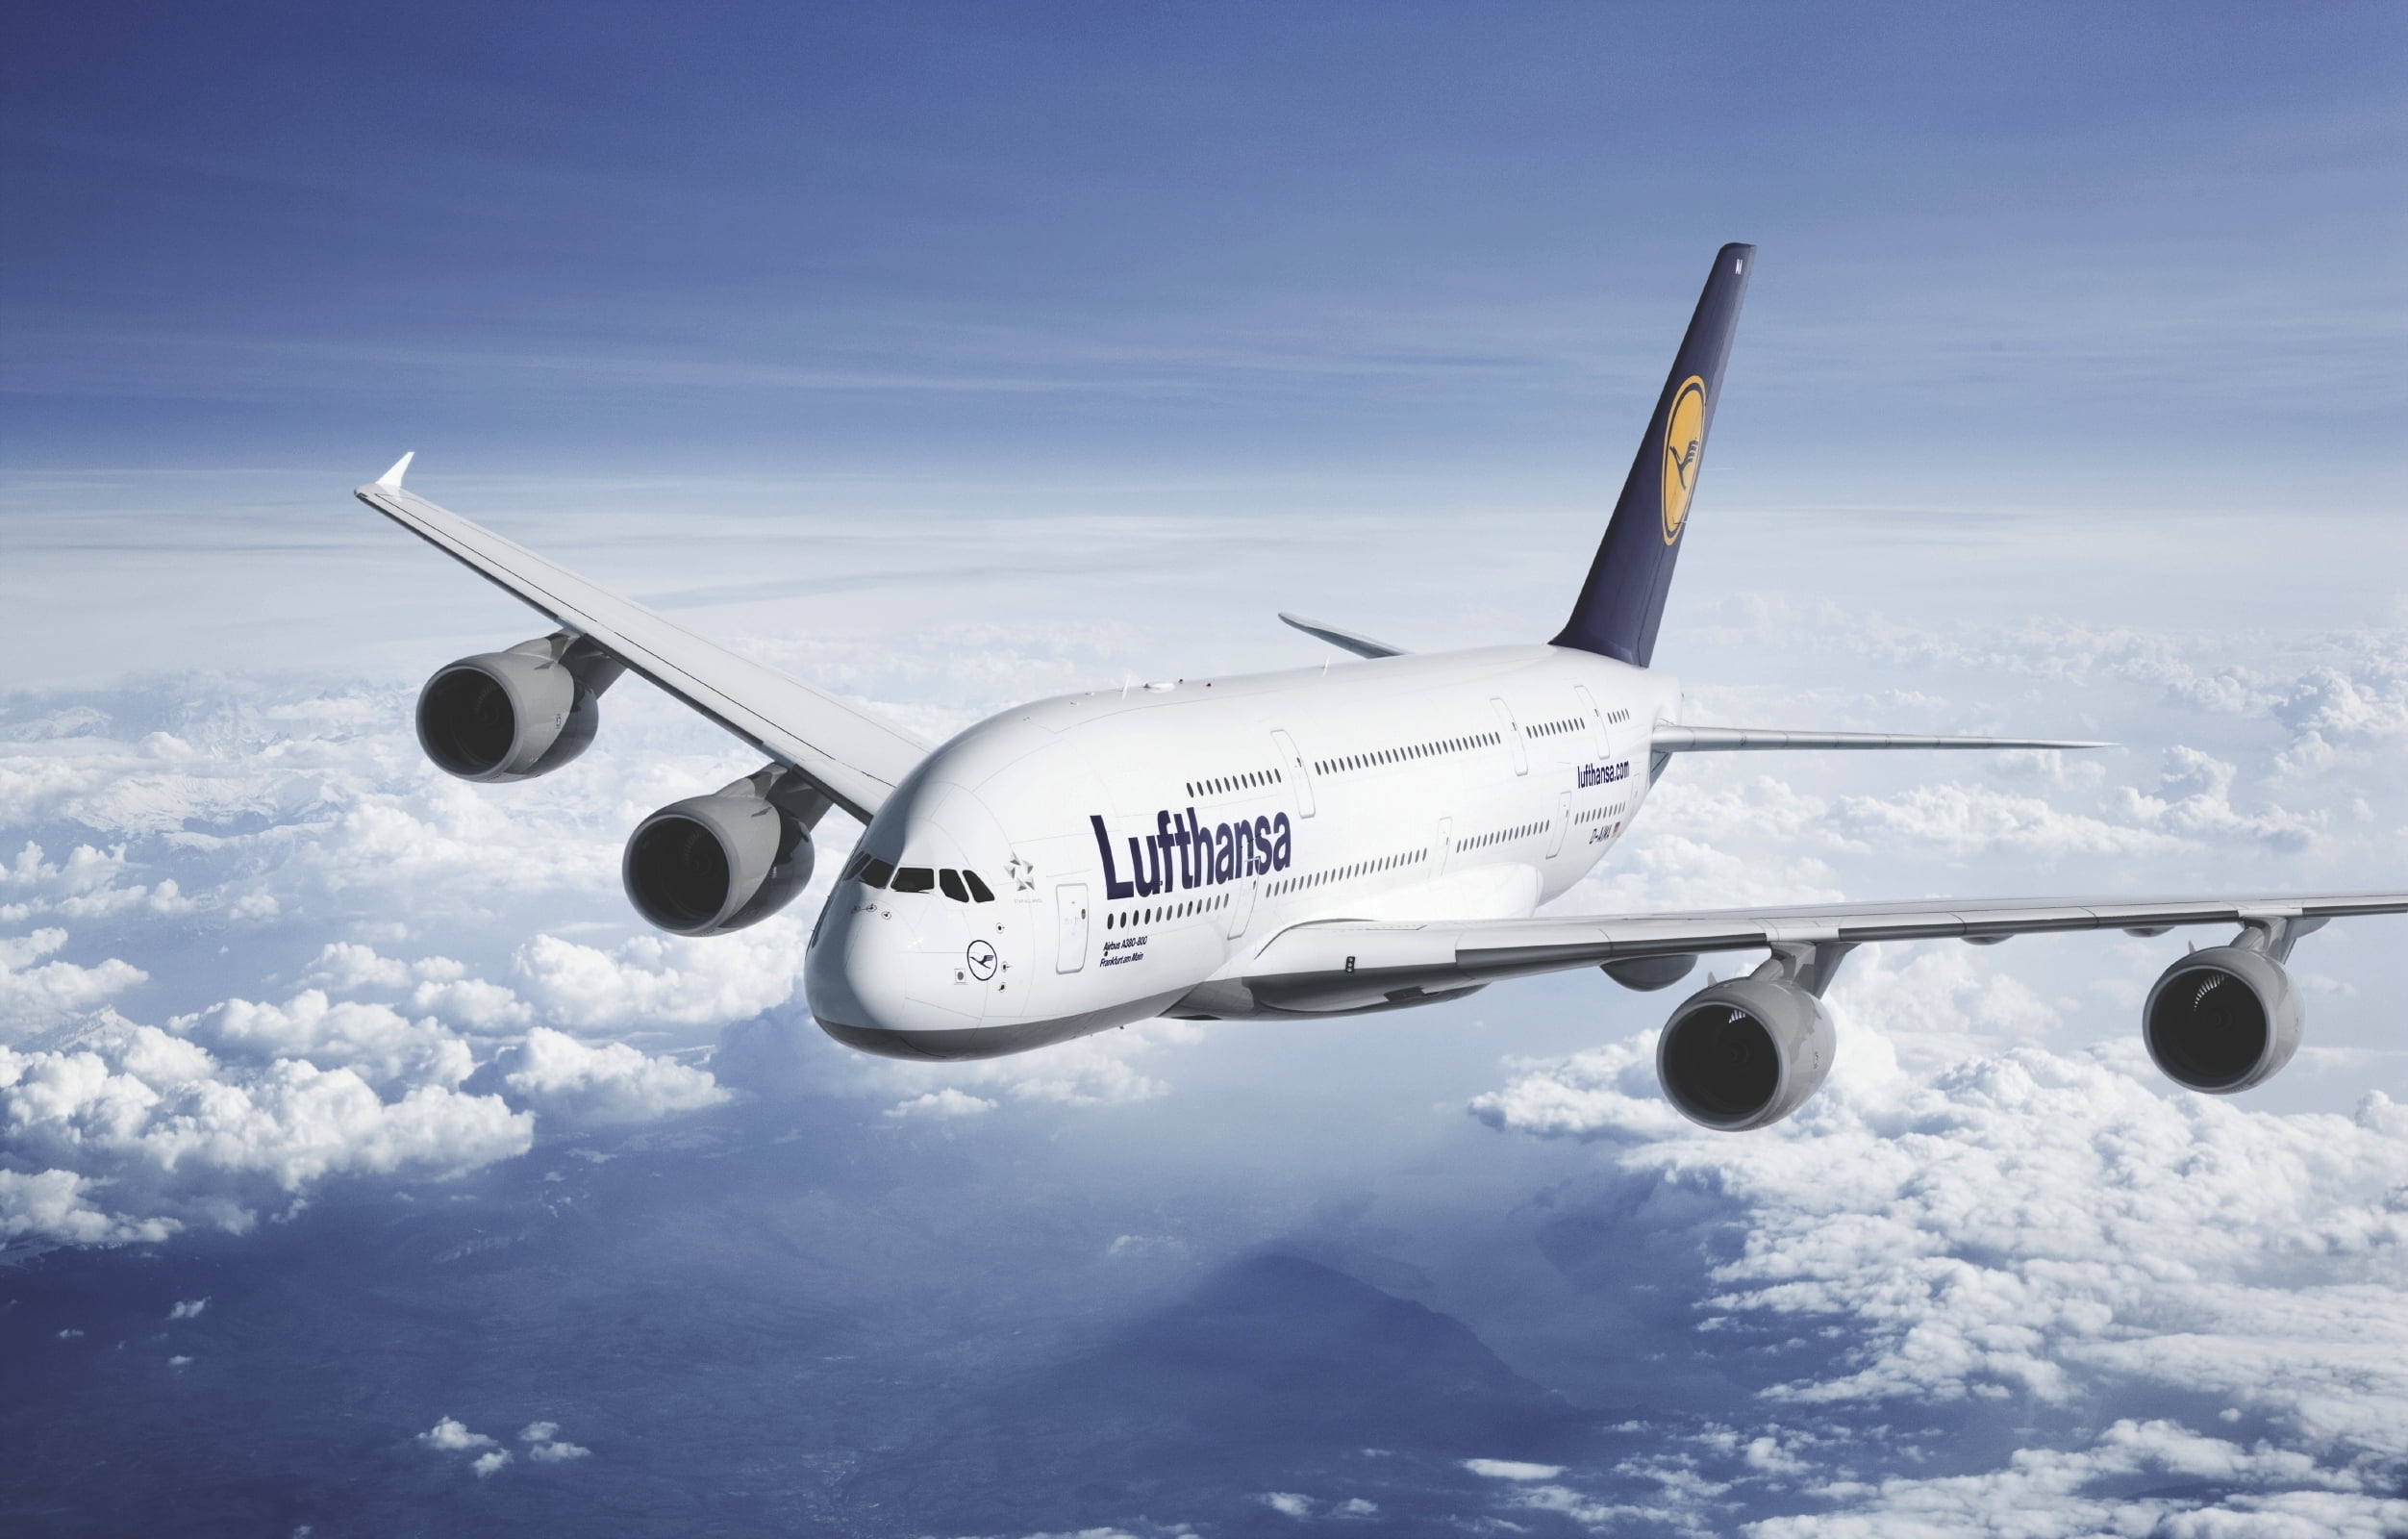 gray Lufthansa airlines, The sky, Clouds, The plane, Liner, Height